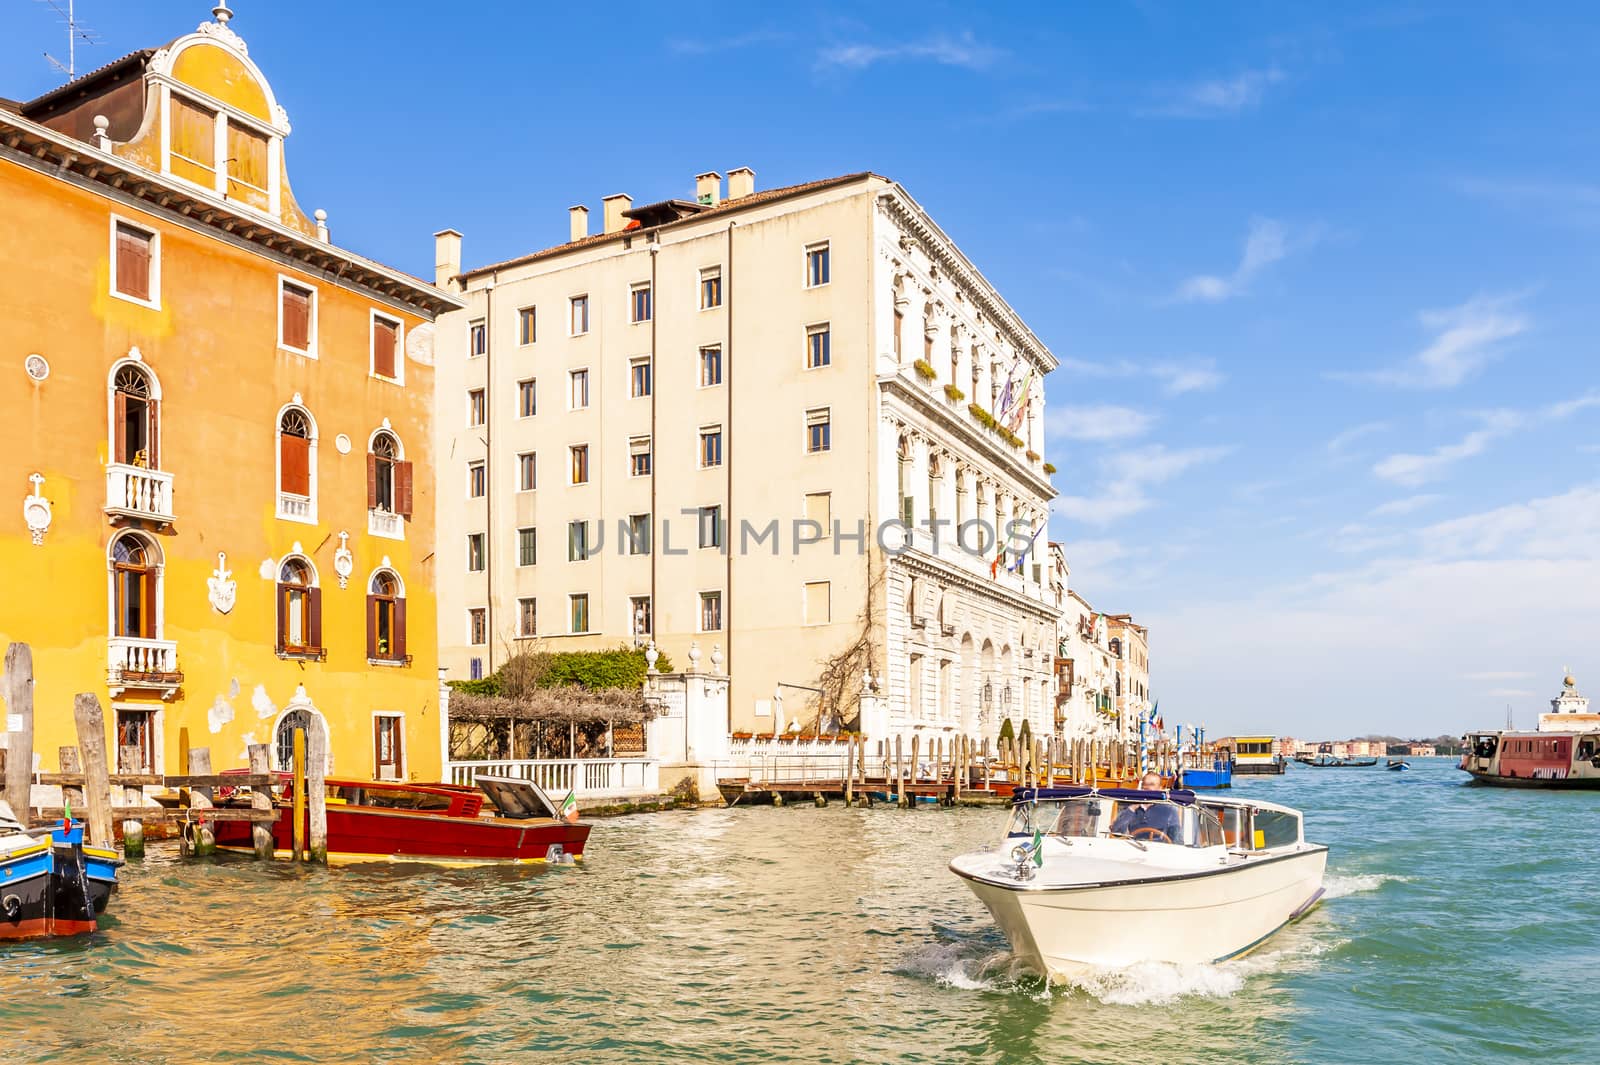 Medieval facades and taxi on the Grand Canal in Venice in Veneto, Italy by Frederic